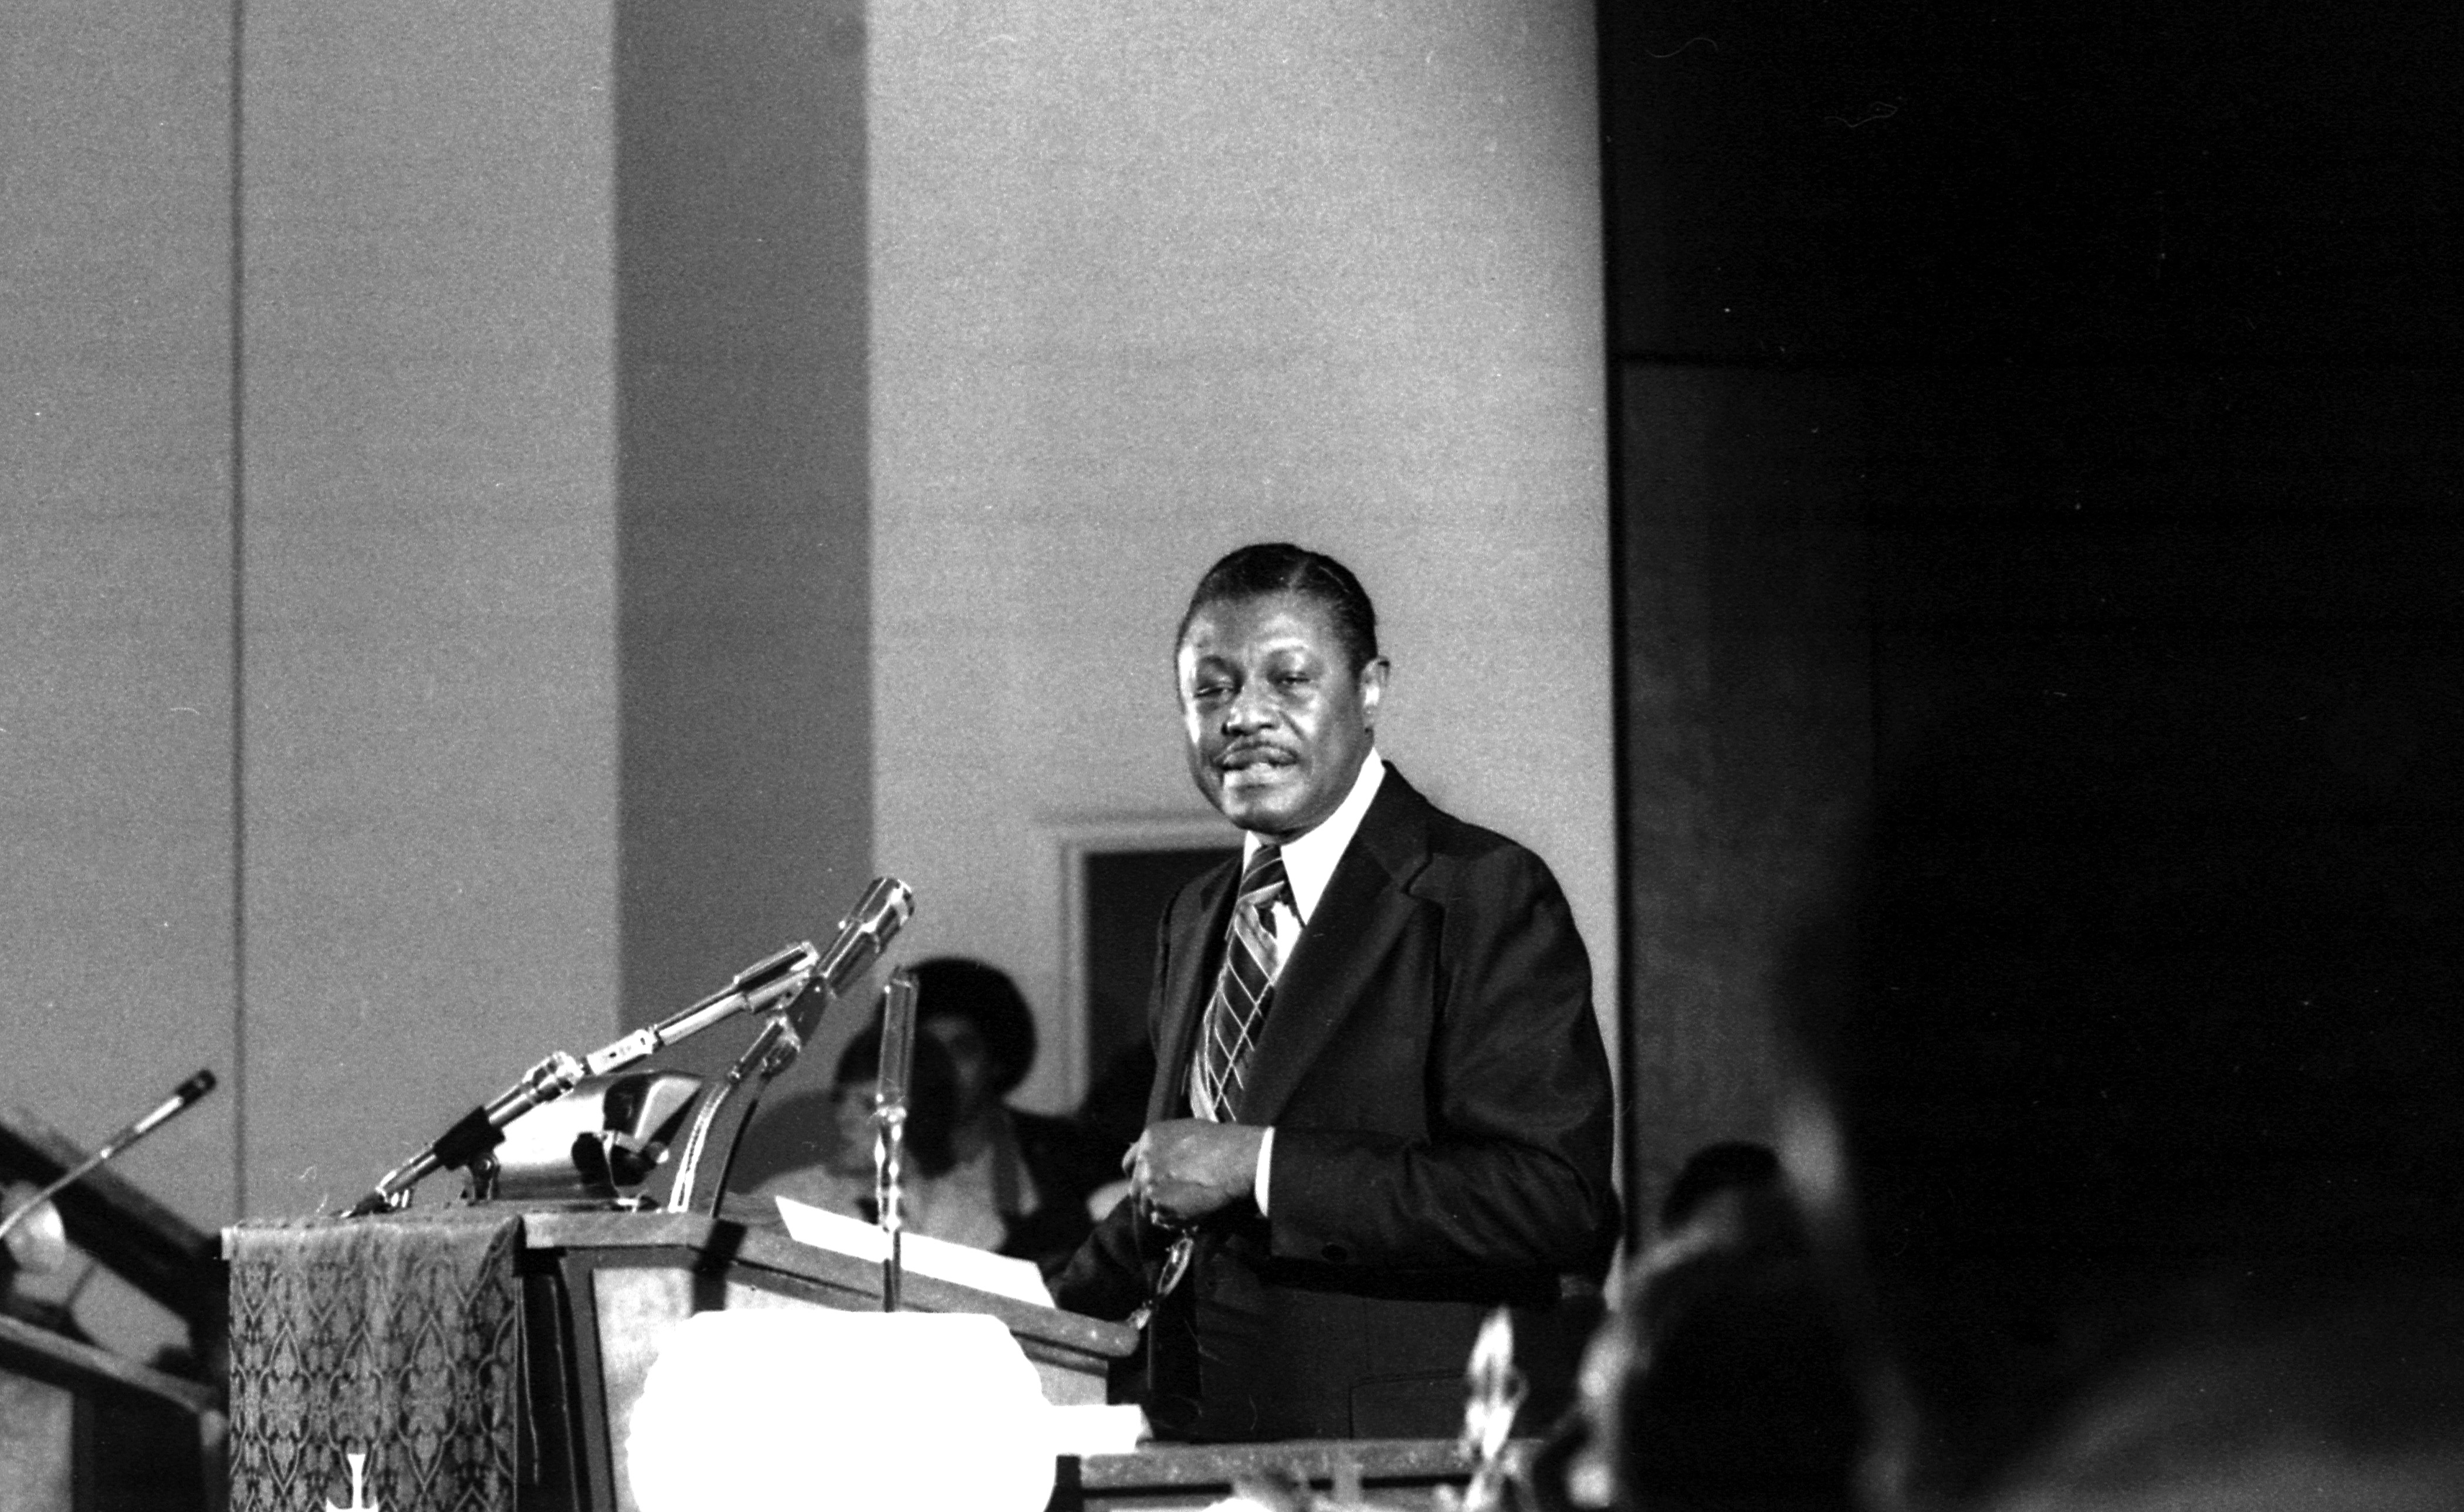 C. L. Franklin, (Clarence LaVaughn Franklin) Pastor of New Bethel Baptist Church, officiating at the funeral service of Florence Ballard, in Detroit on February 27, 1976. | Source: Getty Images